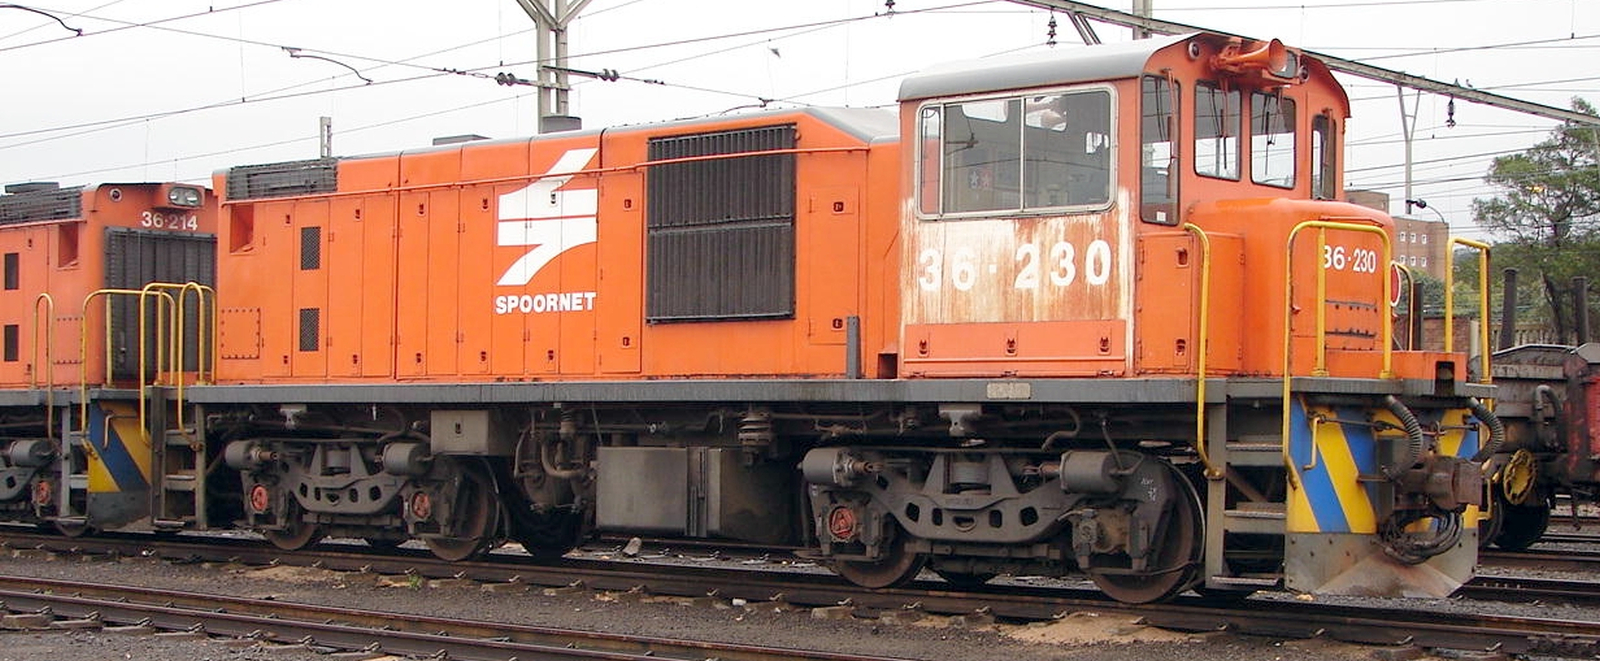 36-230 in front of 36-214 in August 2006 in Durban